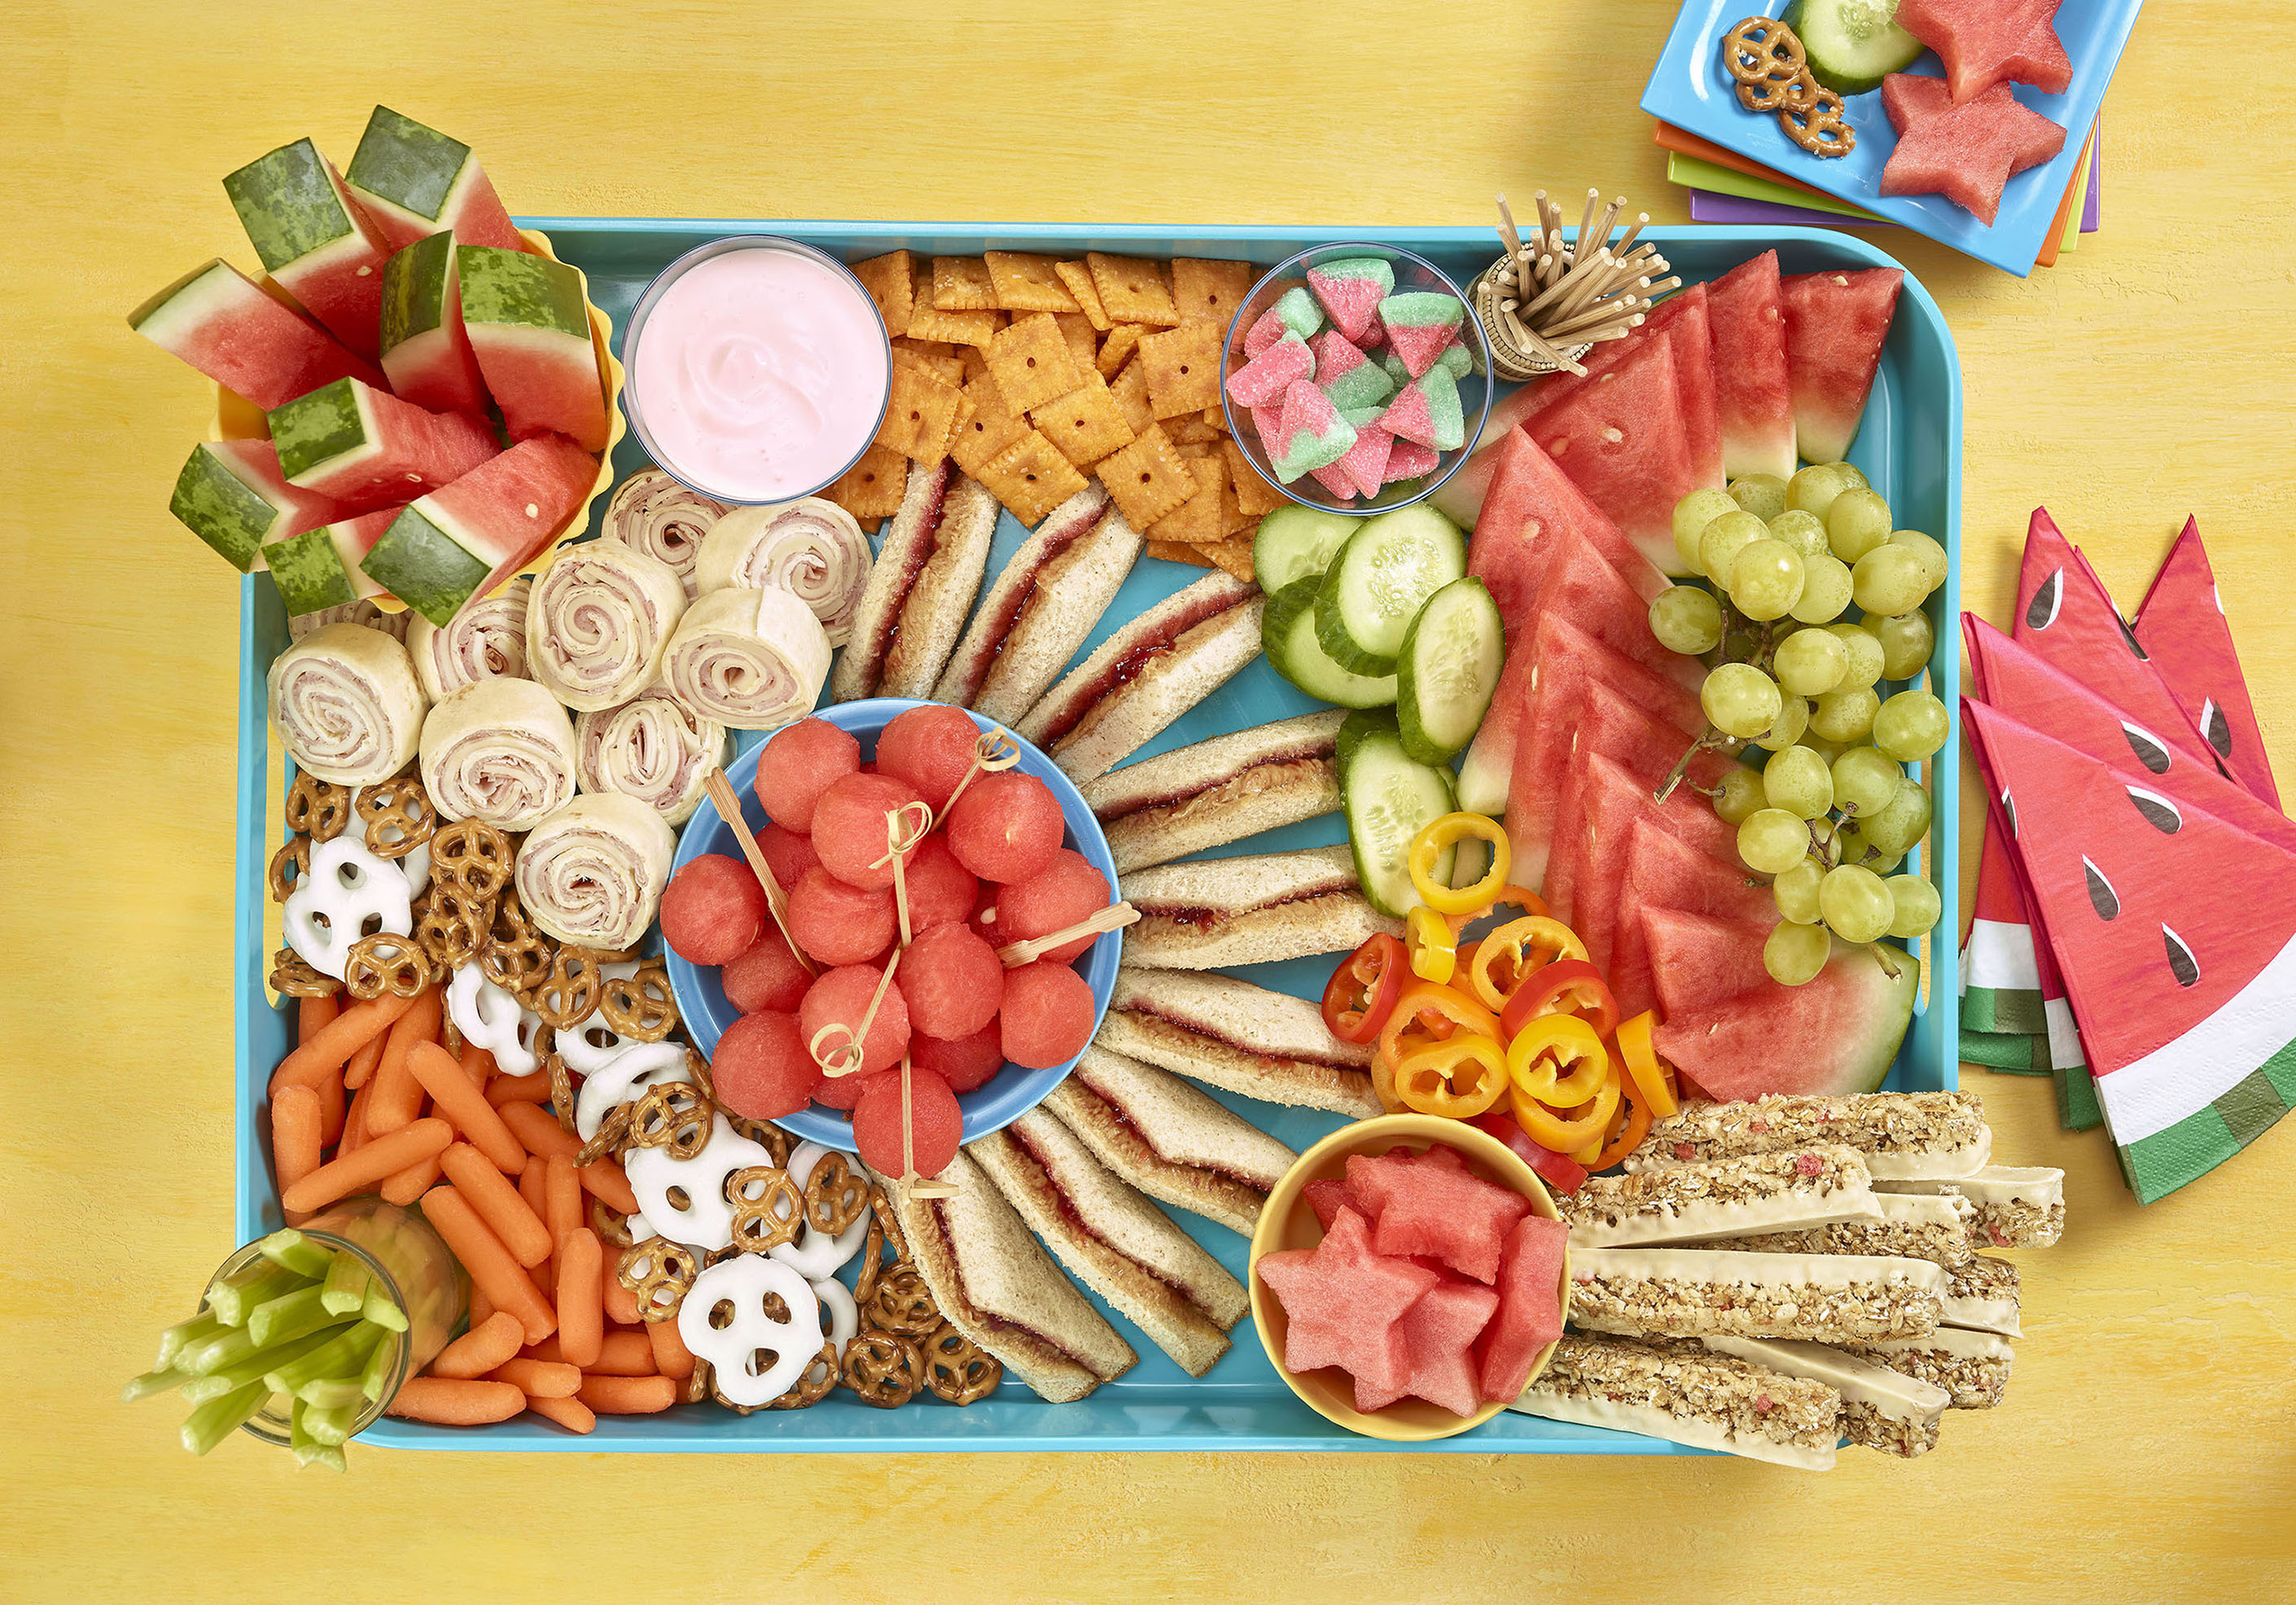 Fall Snack Tray Charcuterie Board for Kids – At Home With Zan